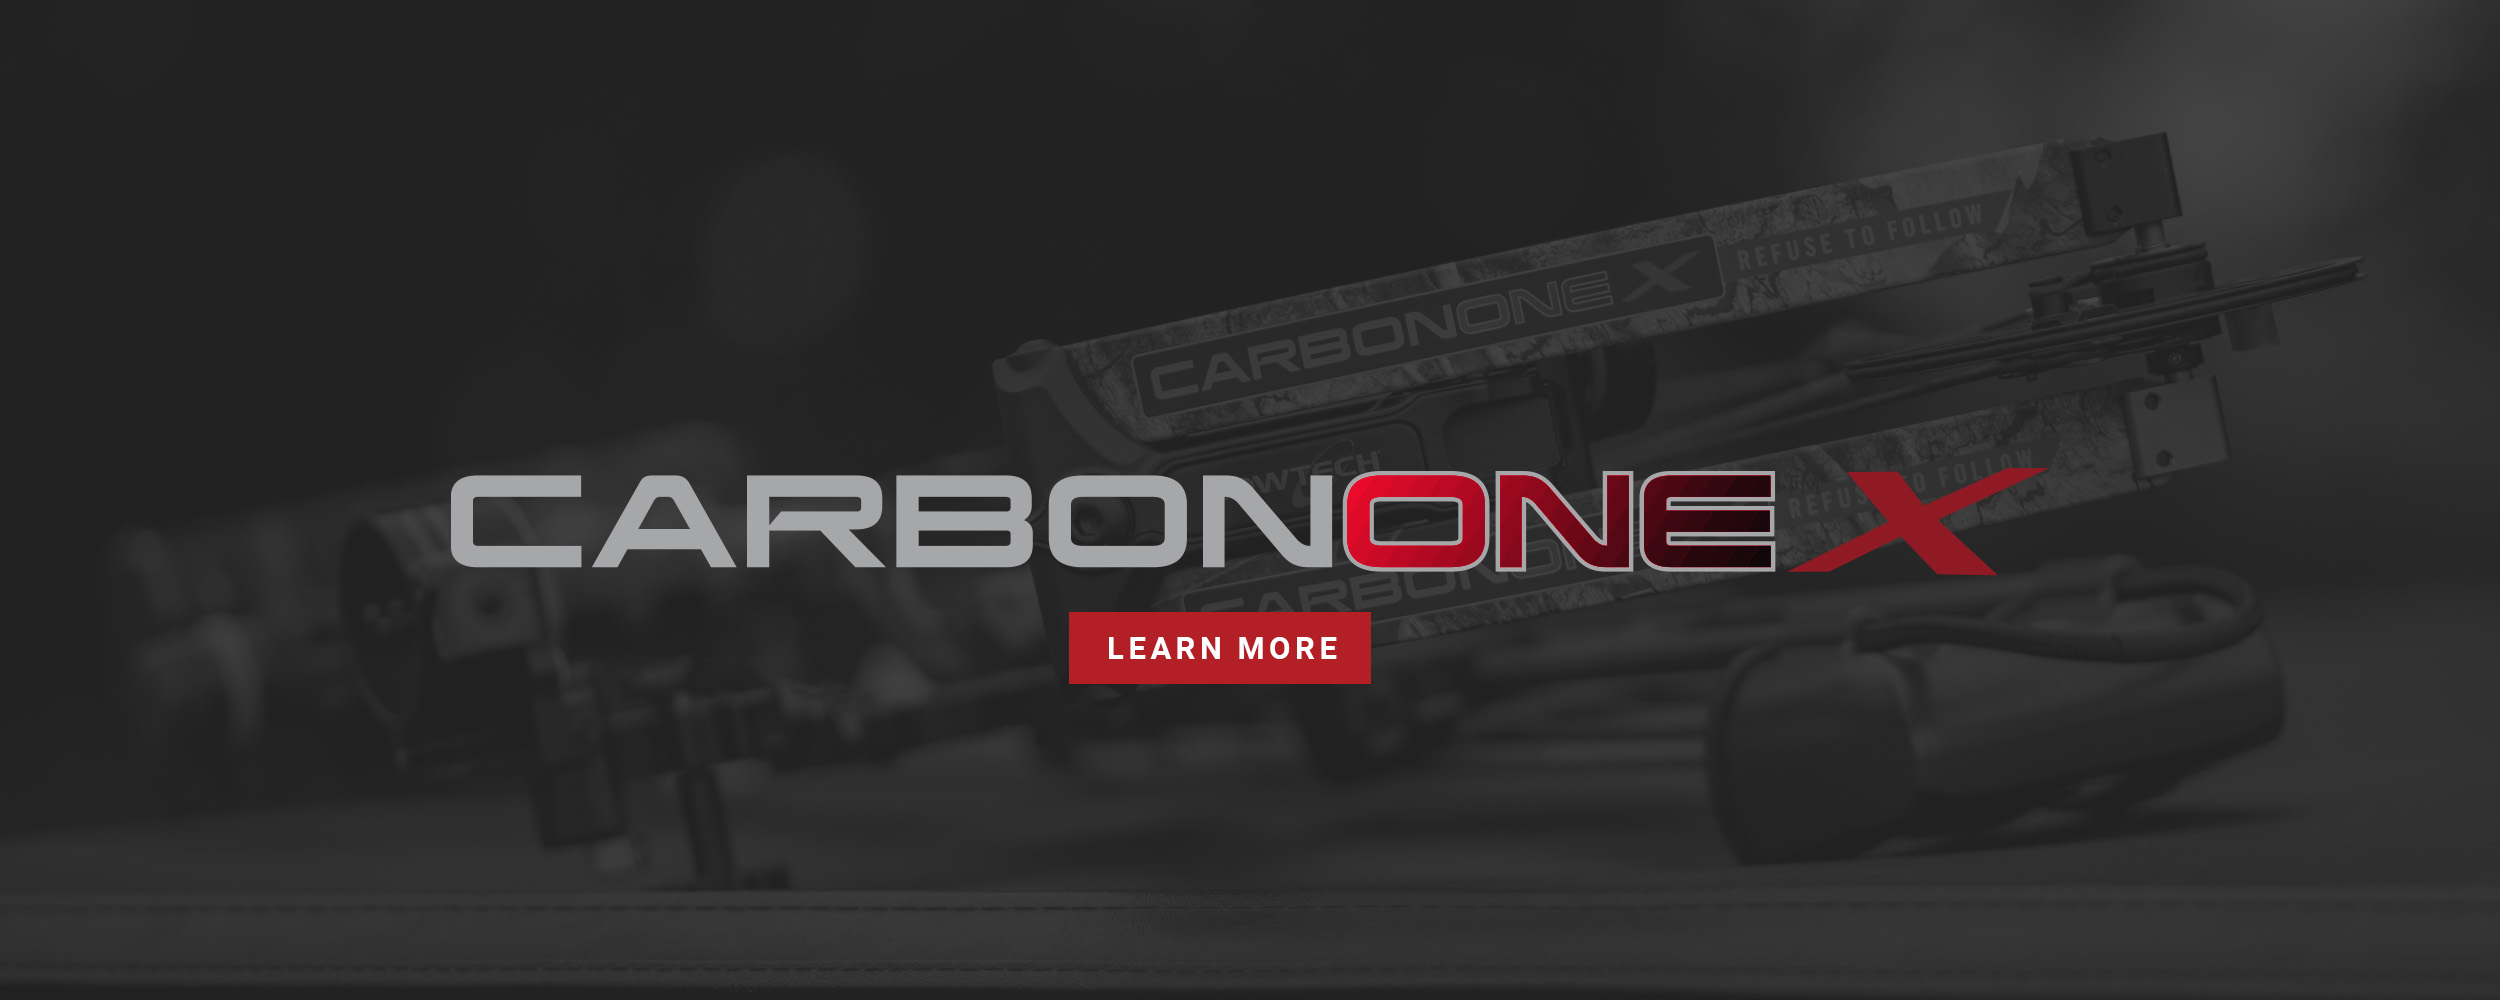 carbon onex banner with learn more button